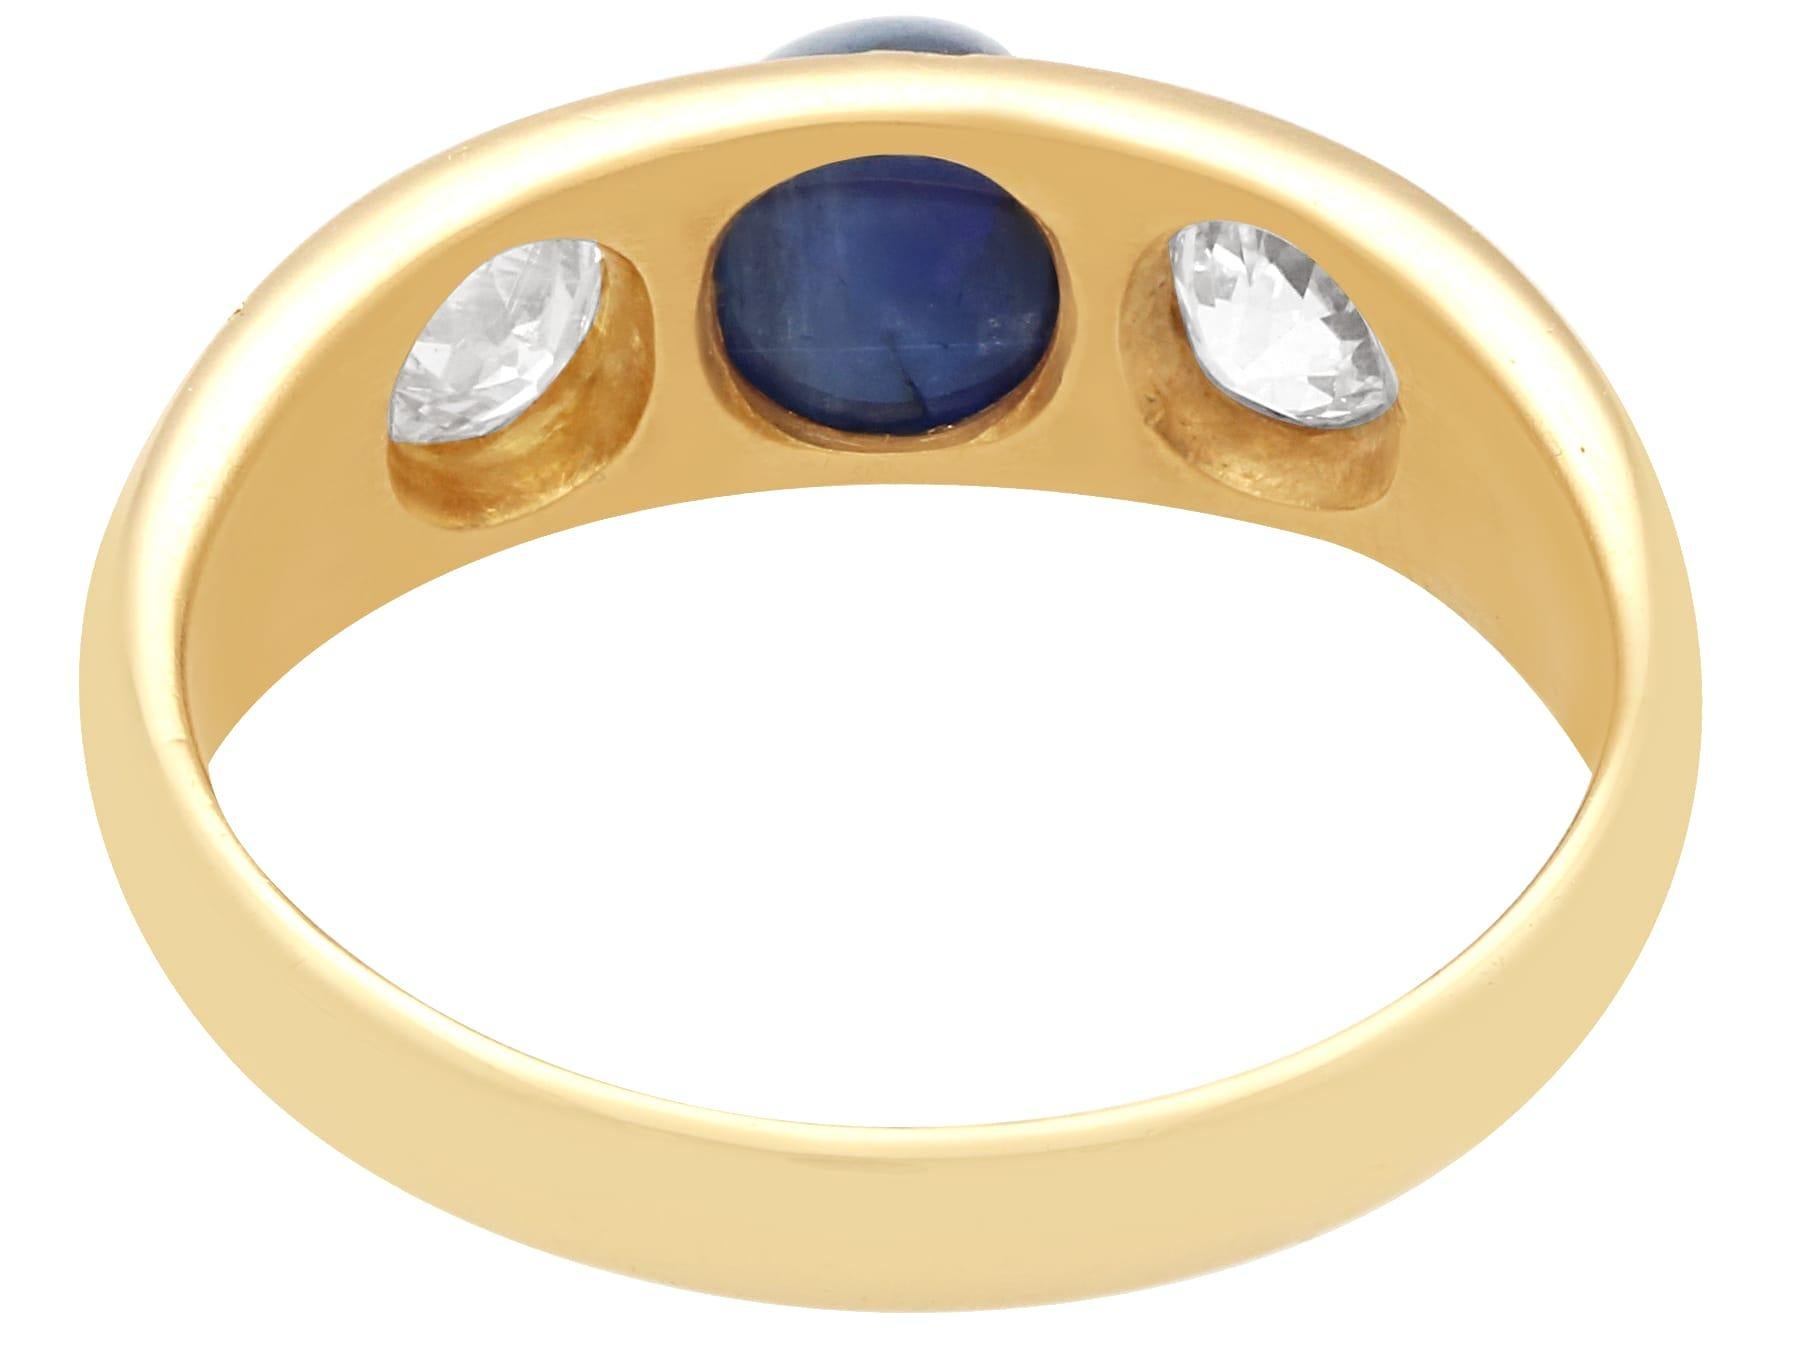 Vintage 1.93Ct Sapphire and 0.63Ct Diamond 18k Yellow Gold Dress Ring Circa 1940 In Excellent Condition For Sale In Jesmond, Newcastle Upon Tyne